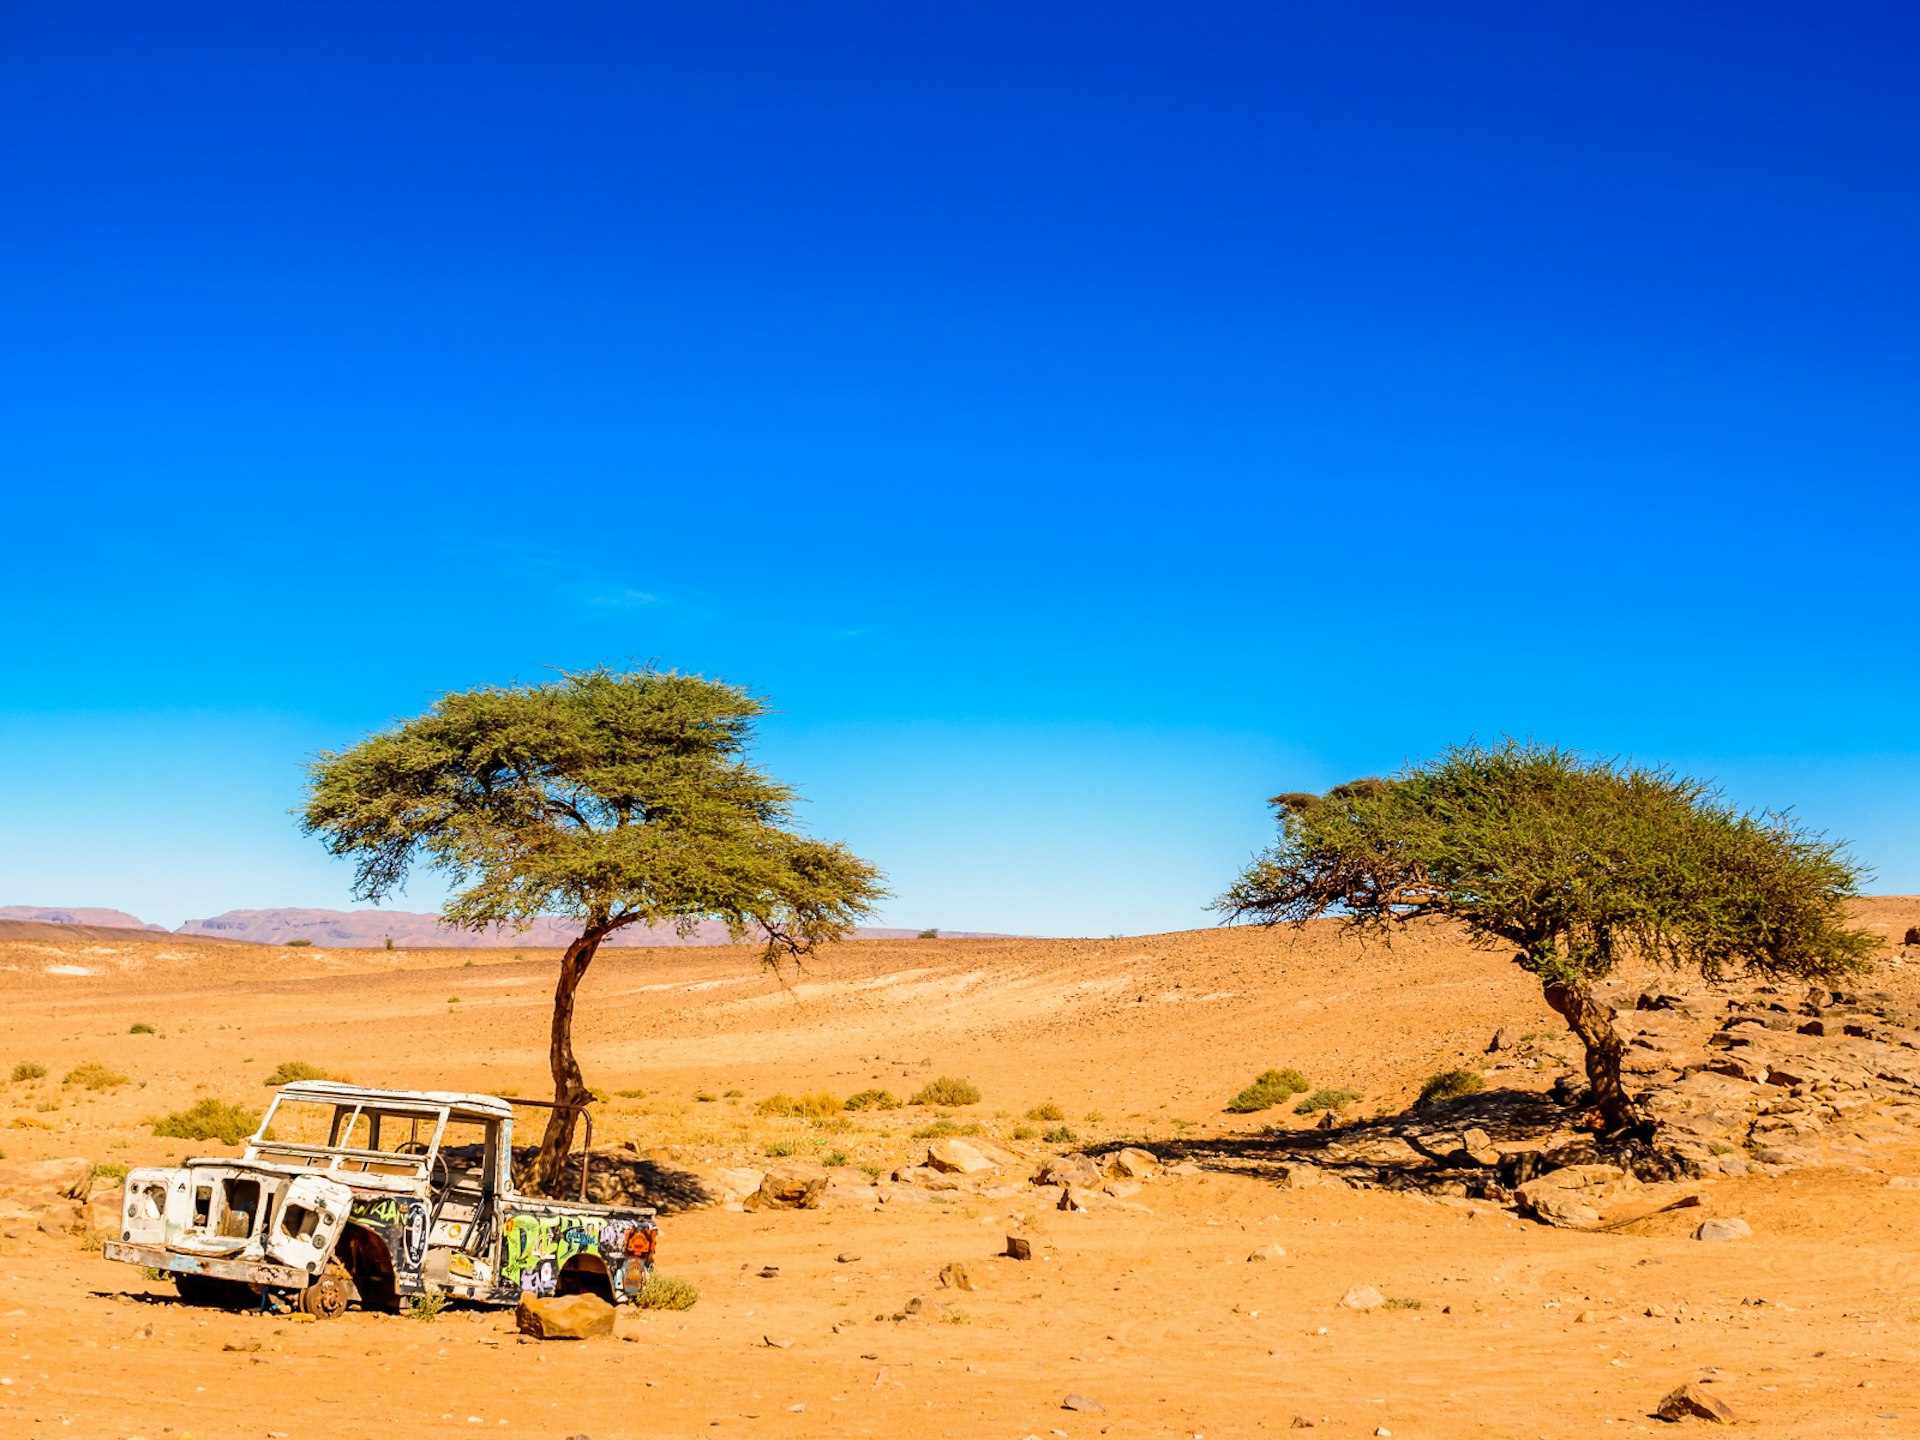 A wrecked vehicle in the Sahara desert © streetflash / Shutterstock